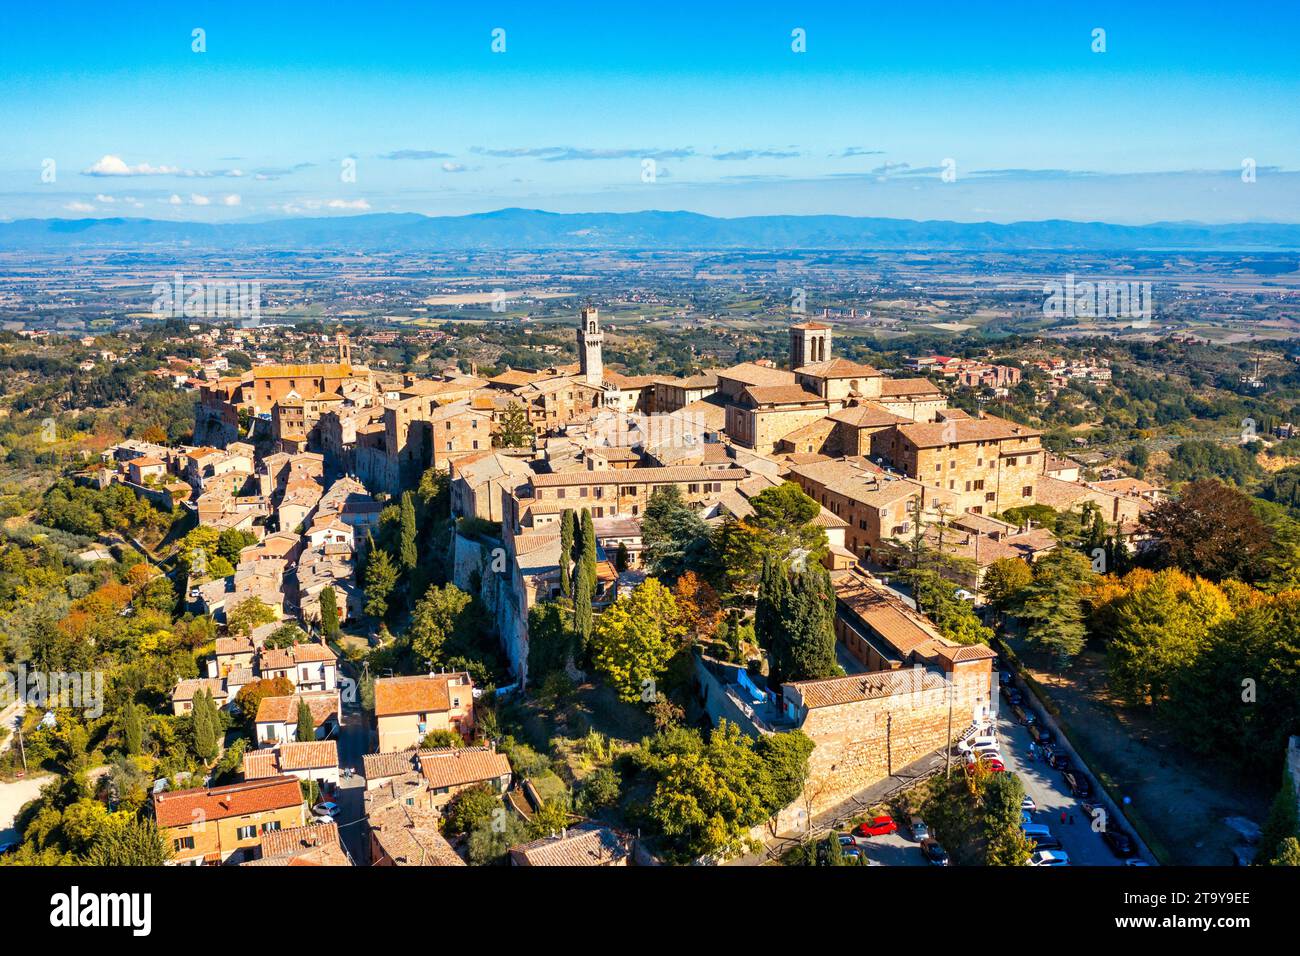 Village of Montepulciano with wonderful architecture and houses. A beautiful old town in Tuscany, Italy. Aerial view of the medieval town of Montepulc Stock Photo